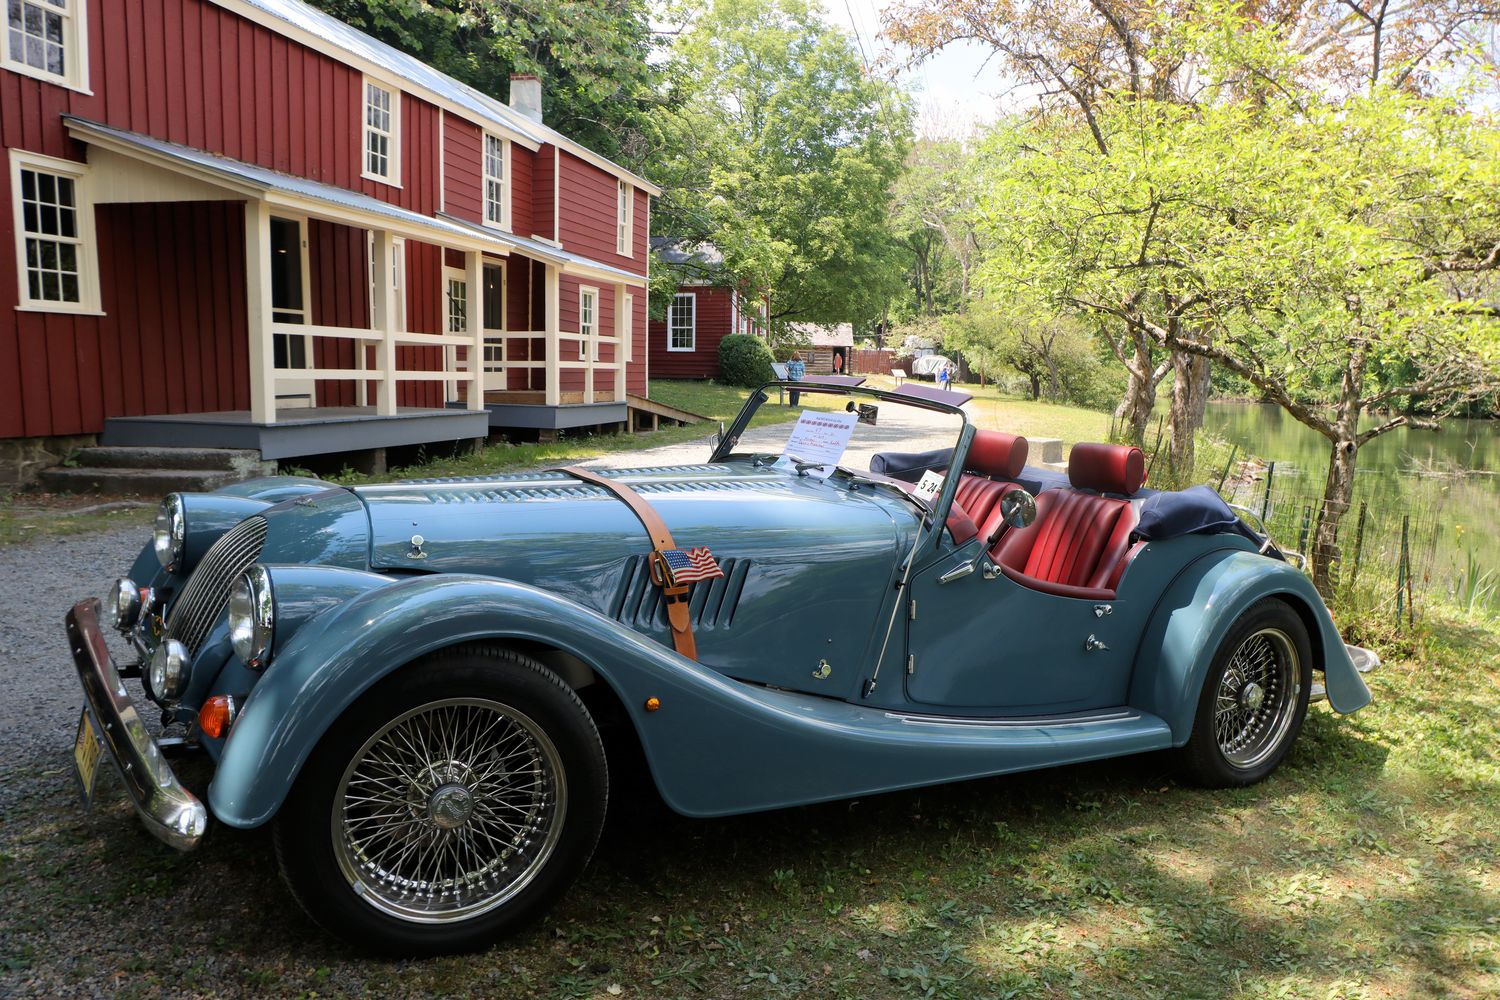 An antique care at the British Car Show at Red Mill Museum Village in Clinton, NJ